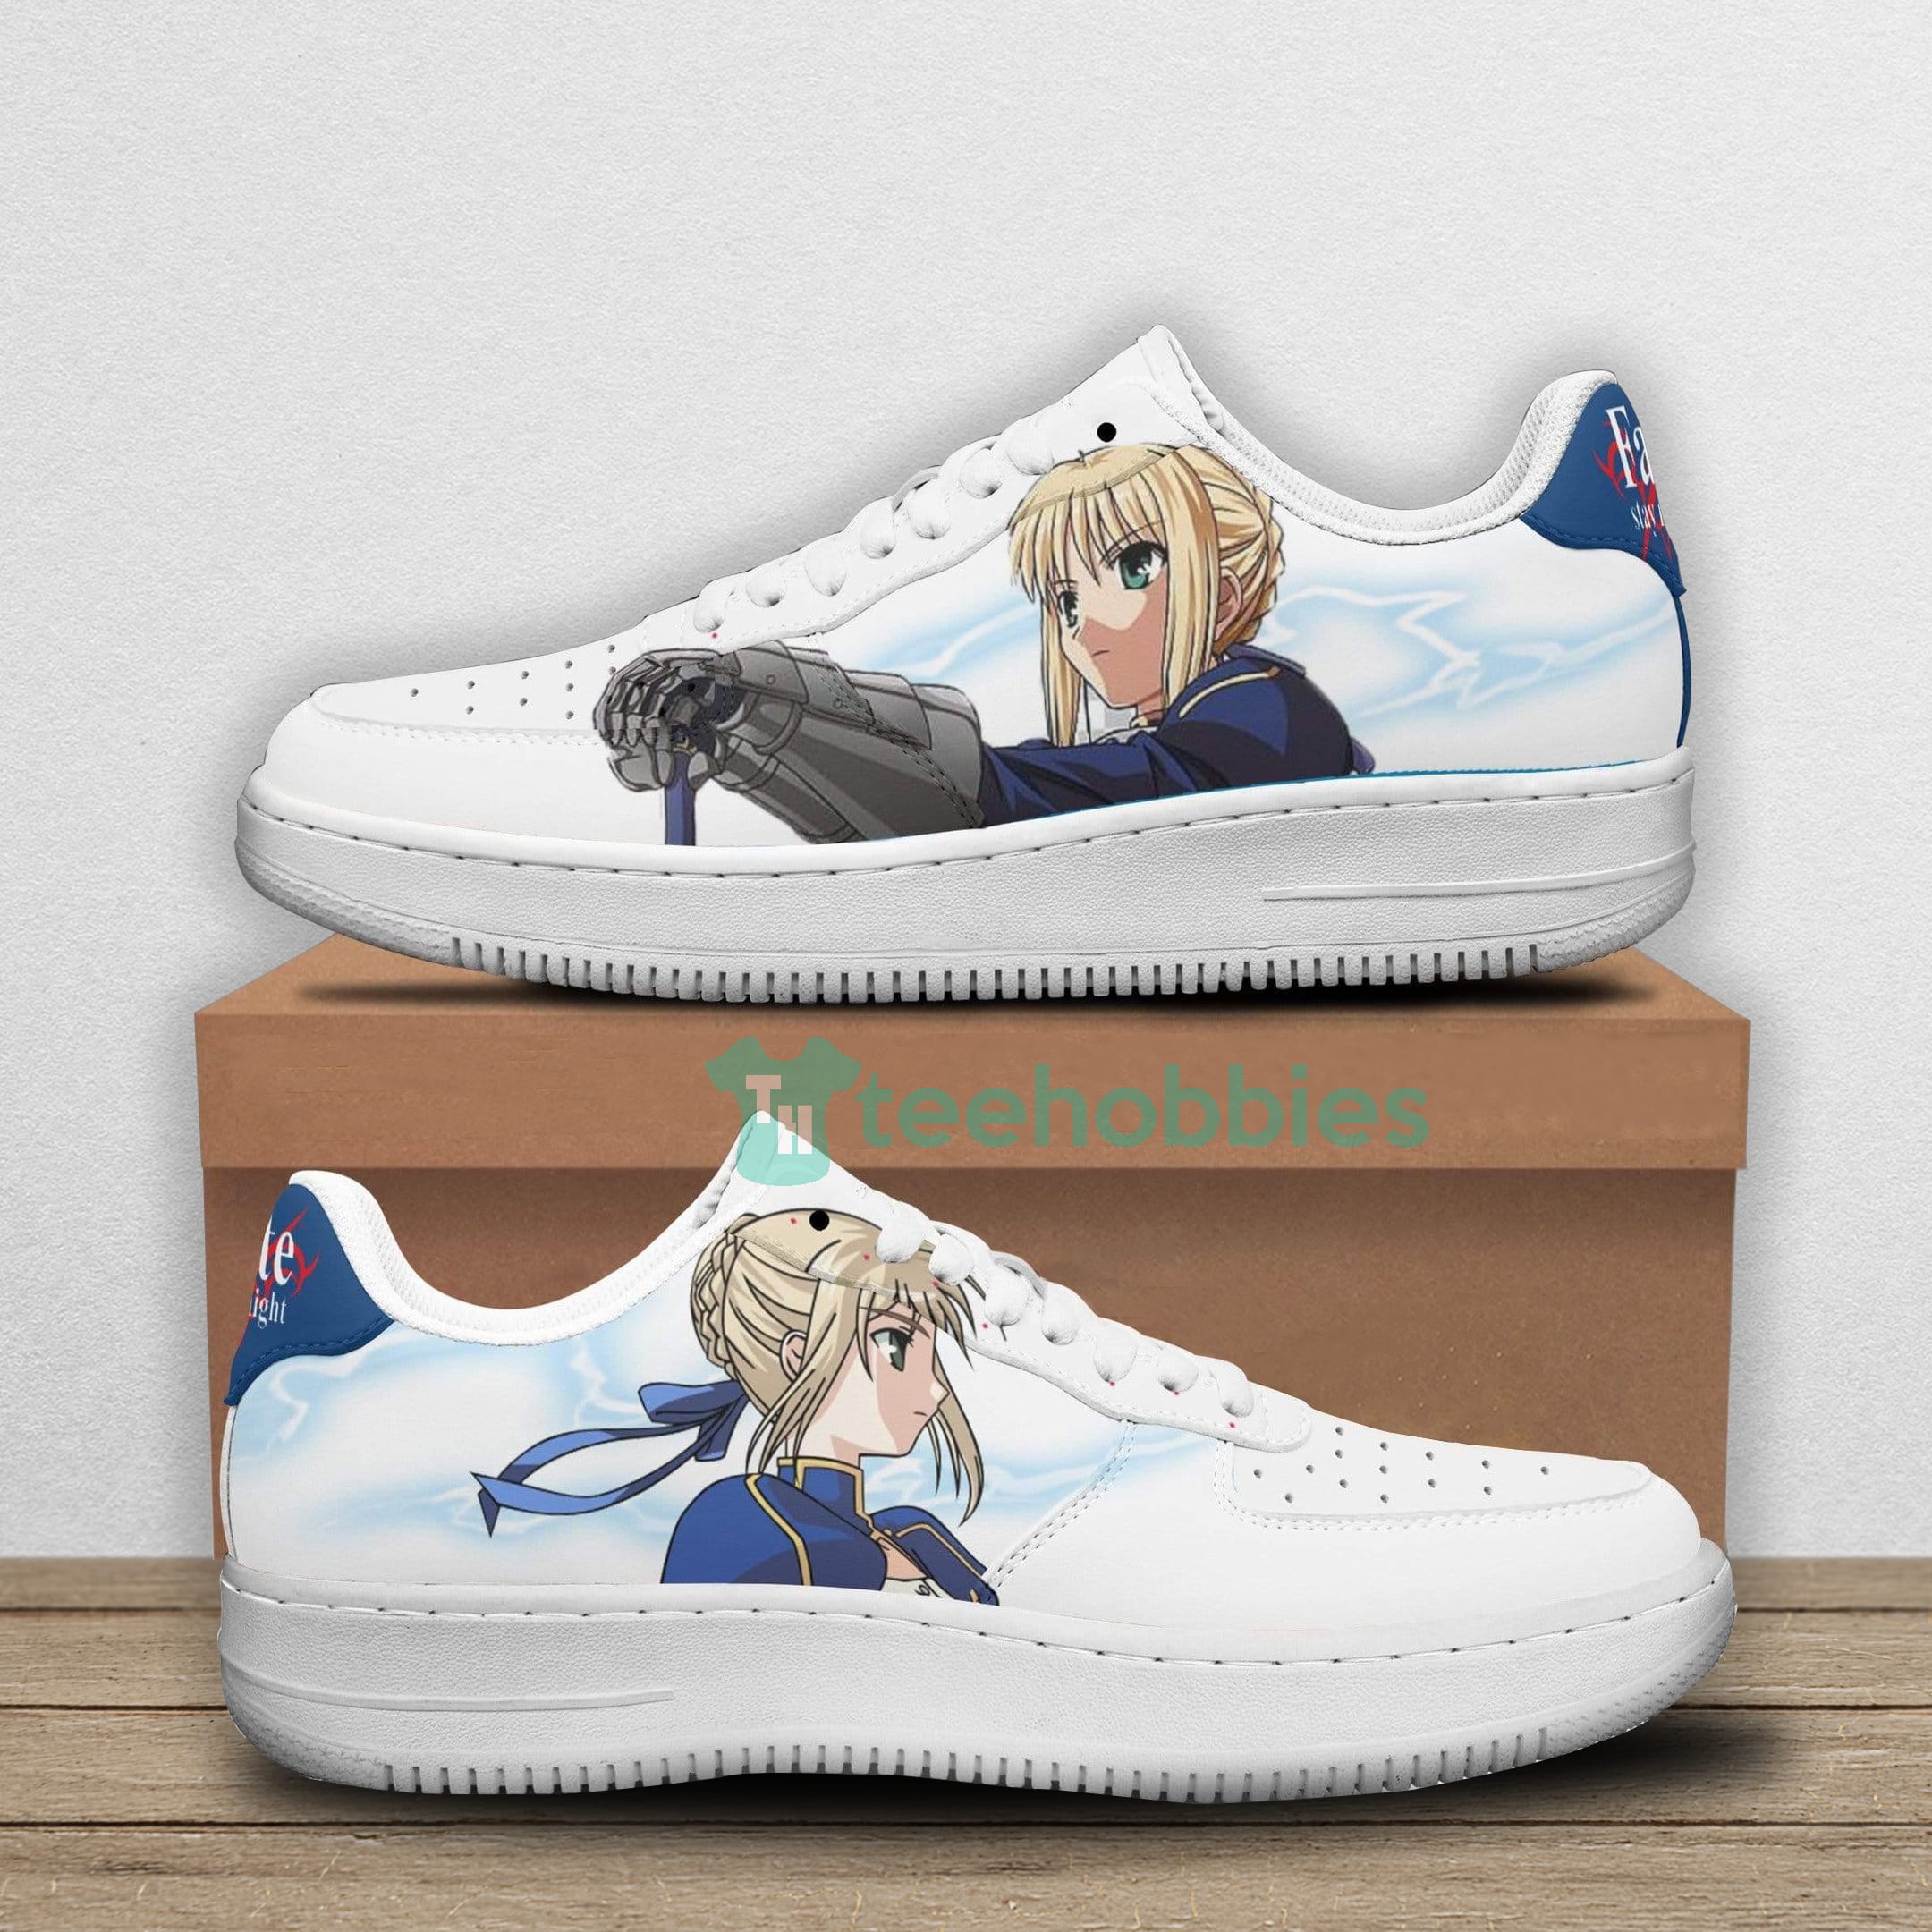 Saber Air Custom Fate Stay Night Anime For Fans Air Force Shoes